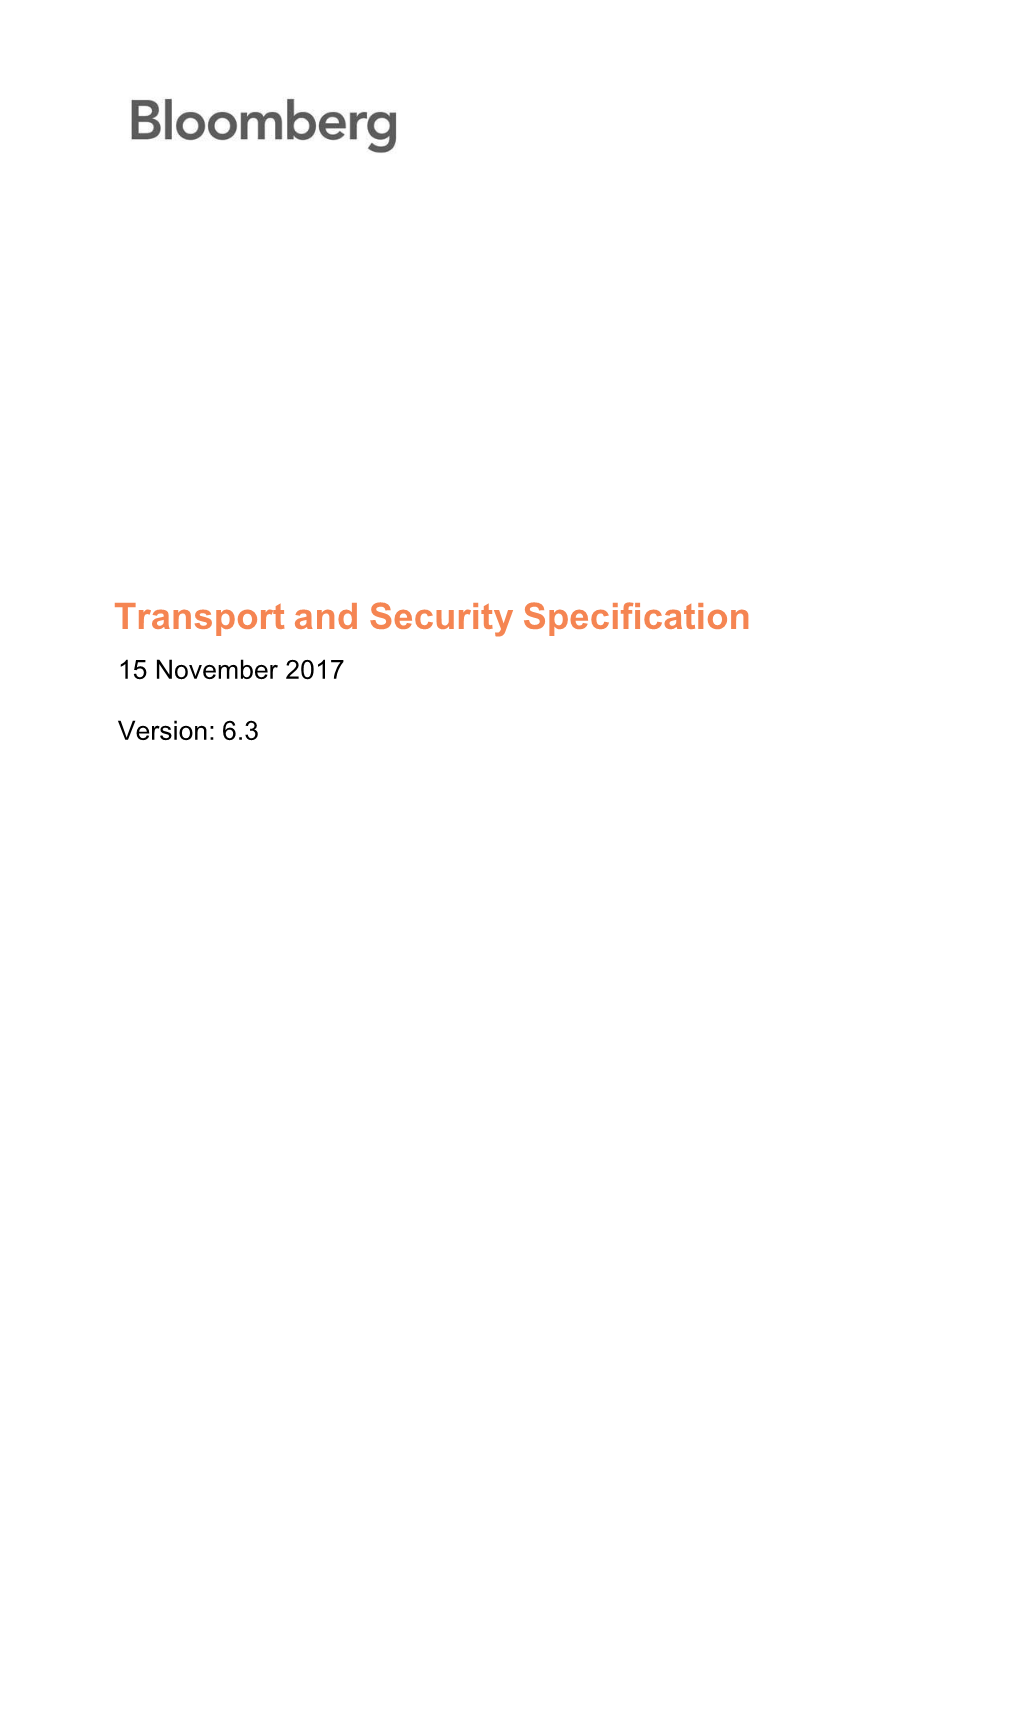 Transport and Security Specification